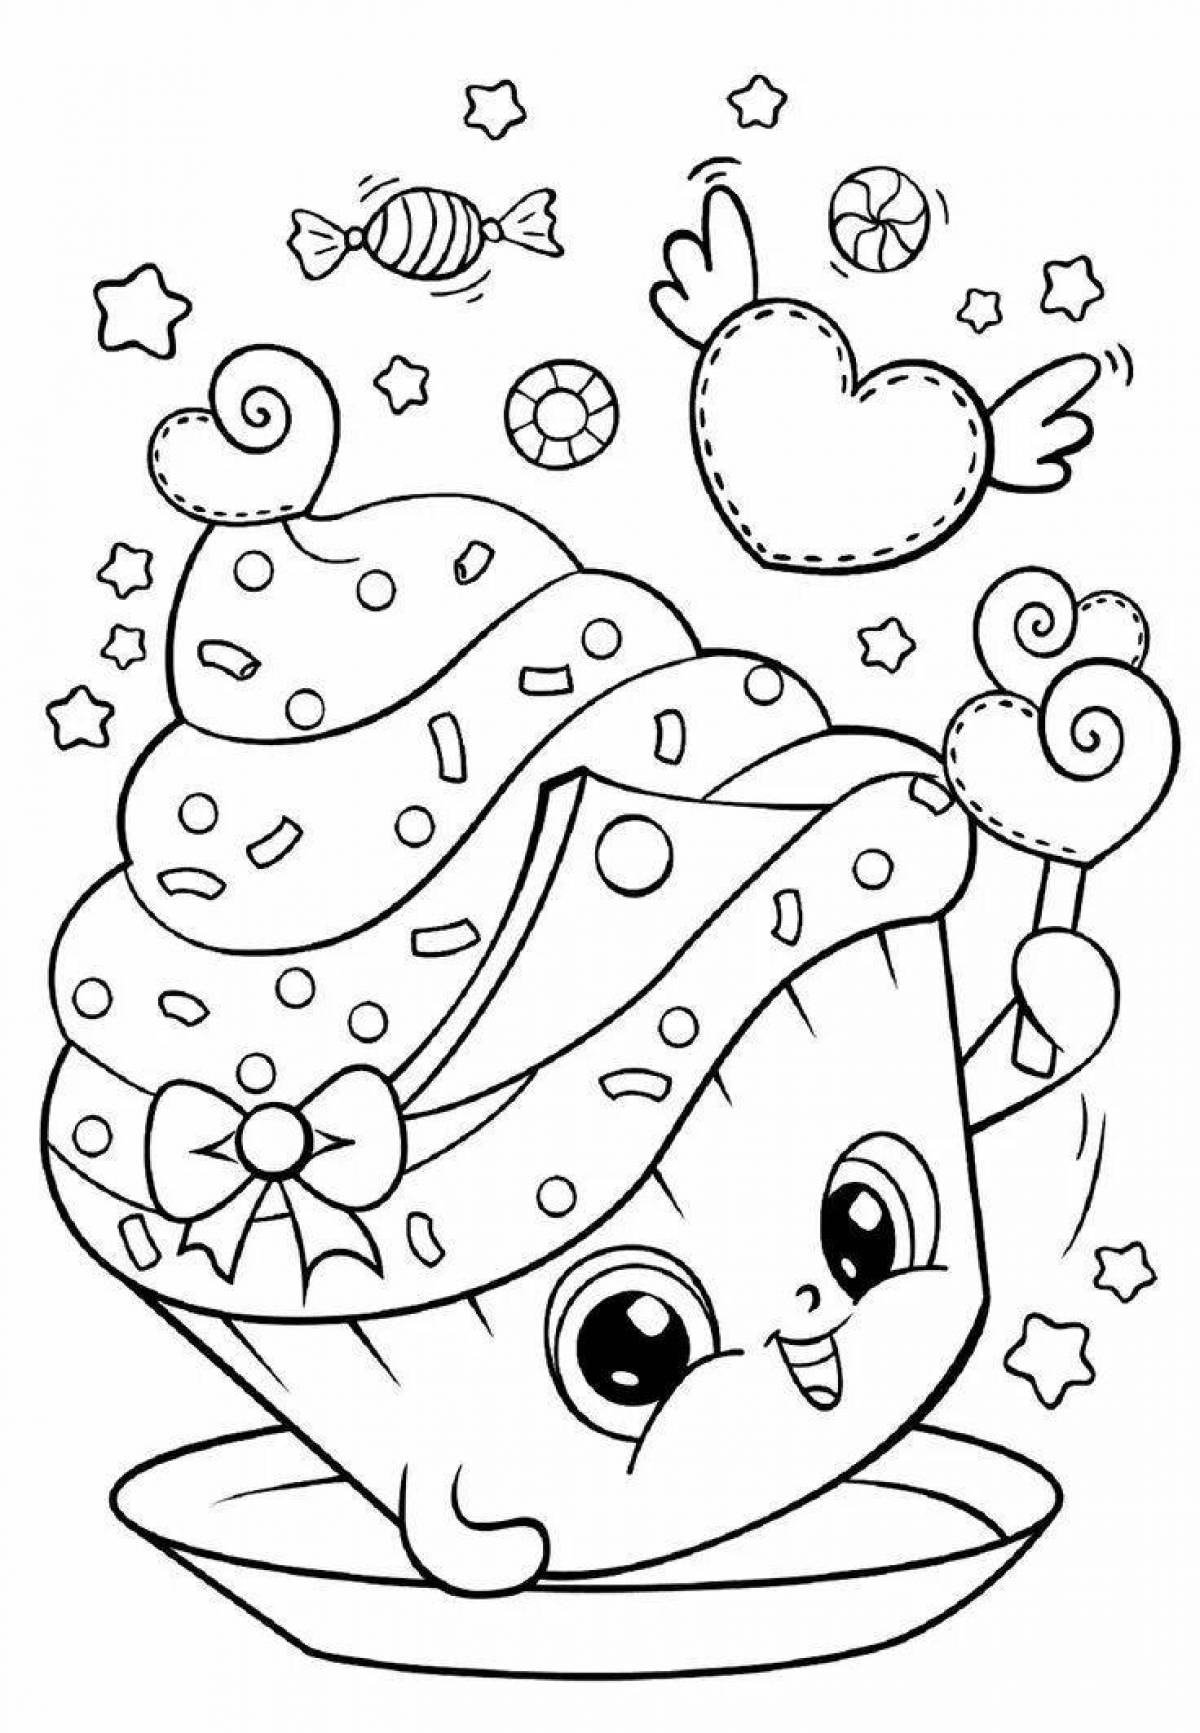 Shopkins coloring page with color splatter for girls